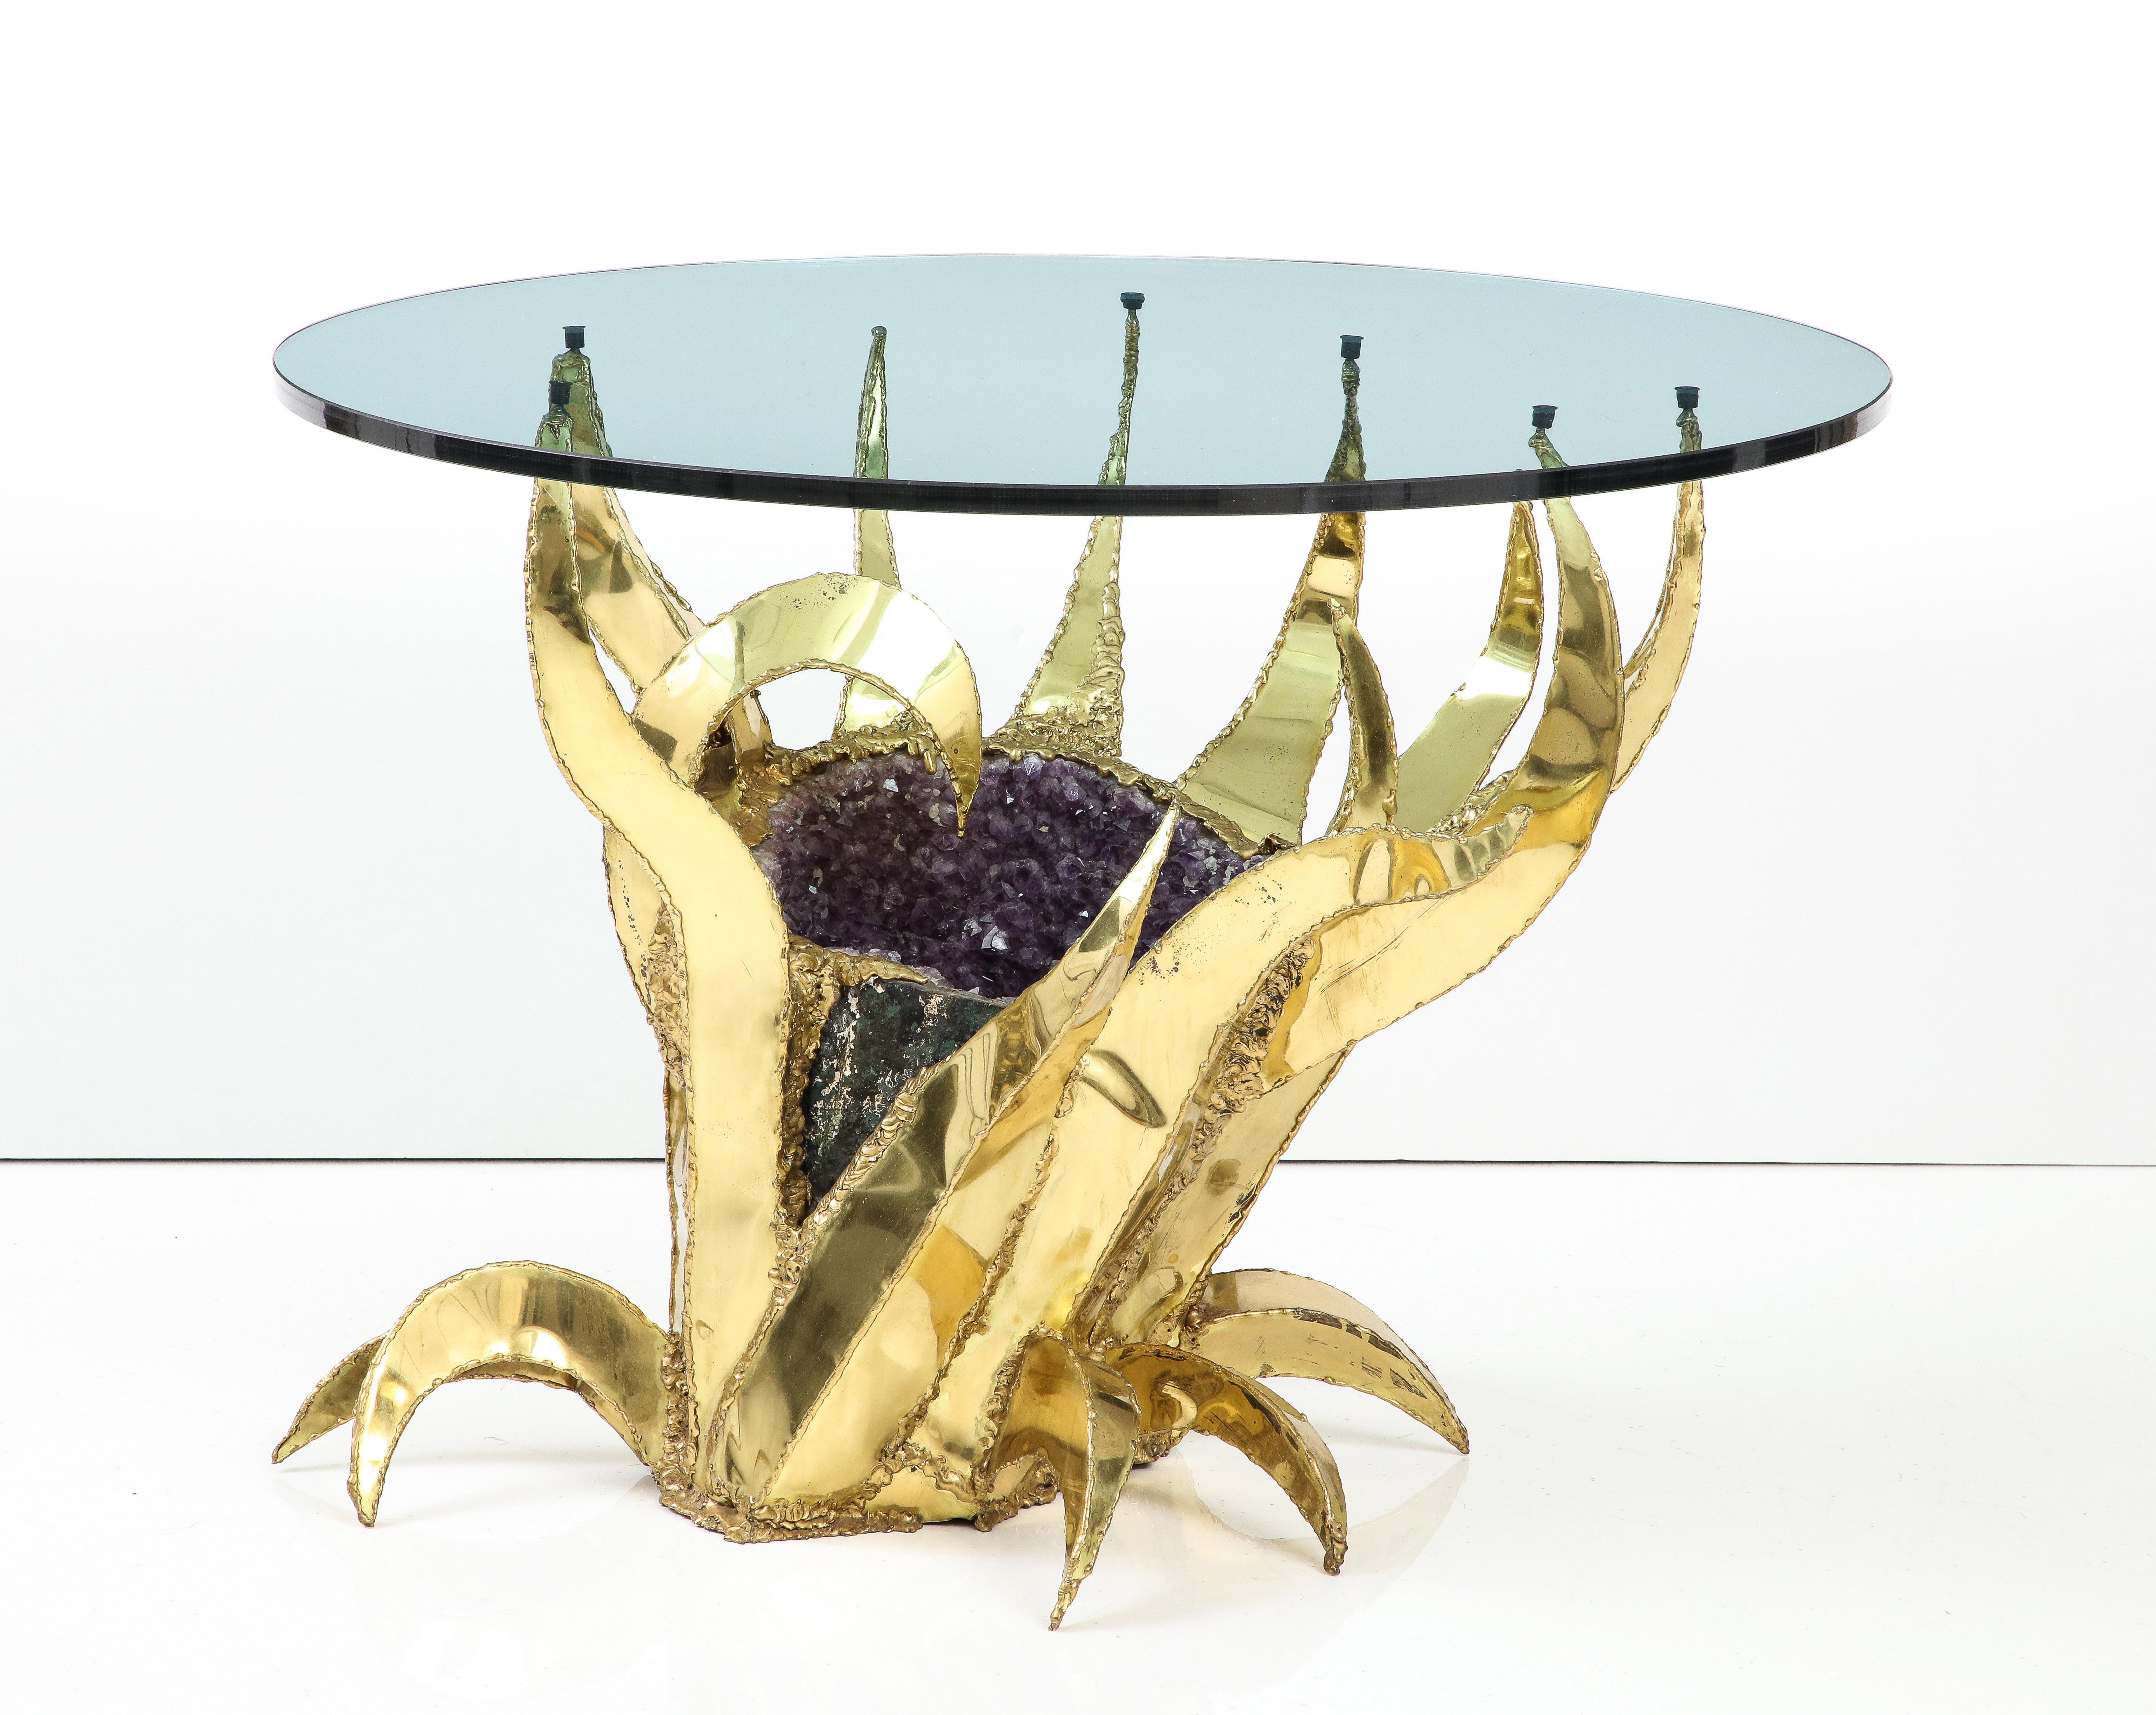 Spectacular 1970's Amethyst Geode table.
The brass Brutalist base is formed around a large Amethyst Geode that sparkles when illuminated.
The table is shown in the main image as a dining table and then in images
2 through 4 as a side table.